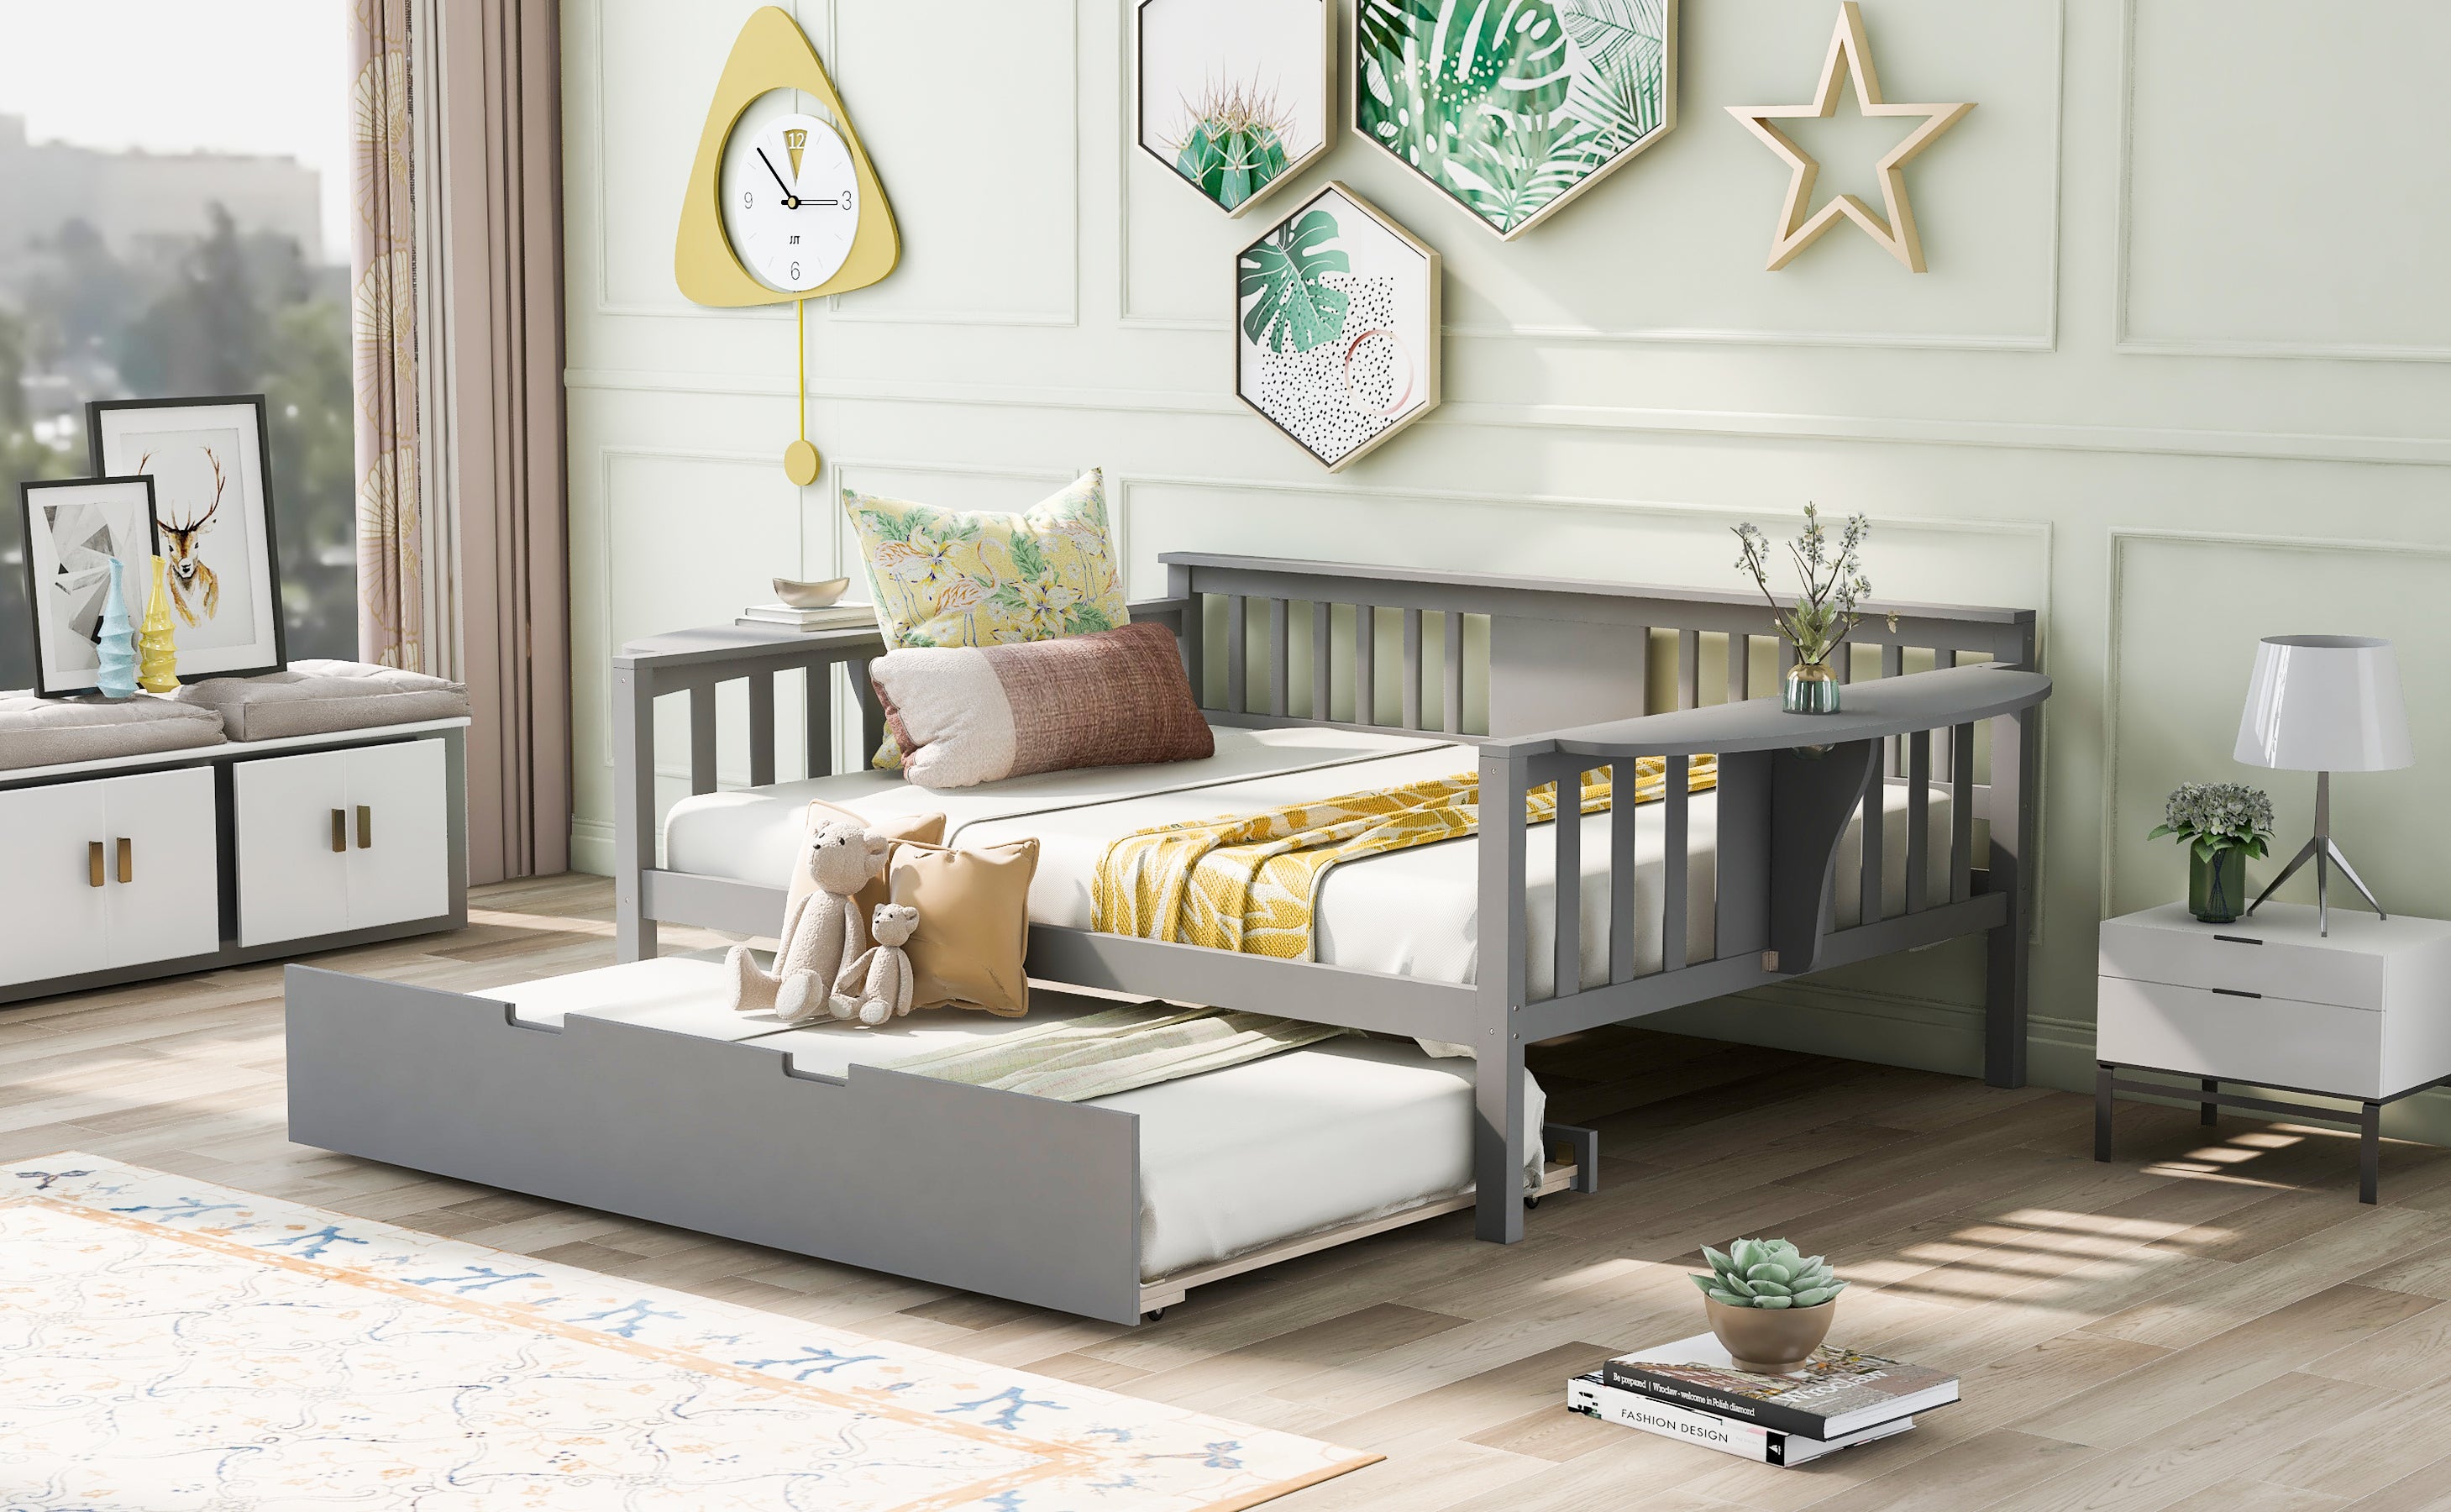 Full size Daybed with Twin size Trundle (Gray)